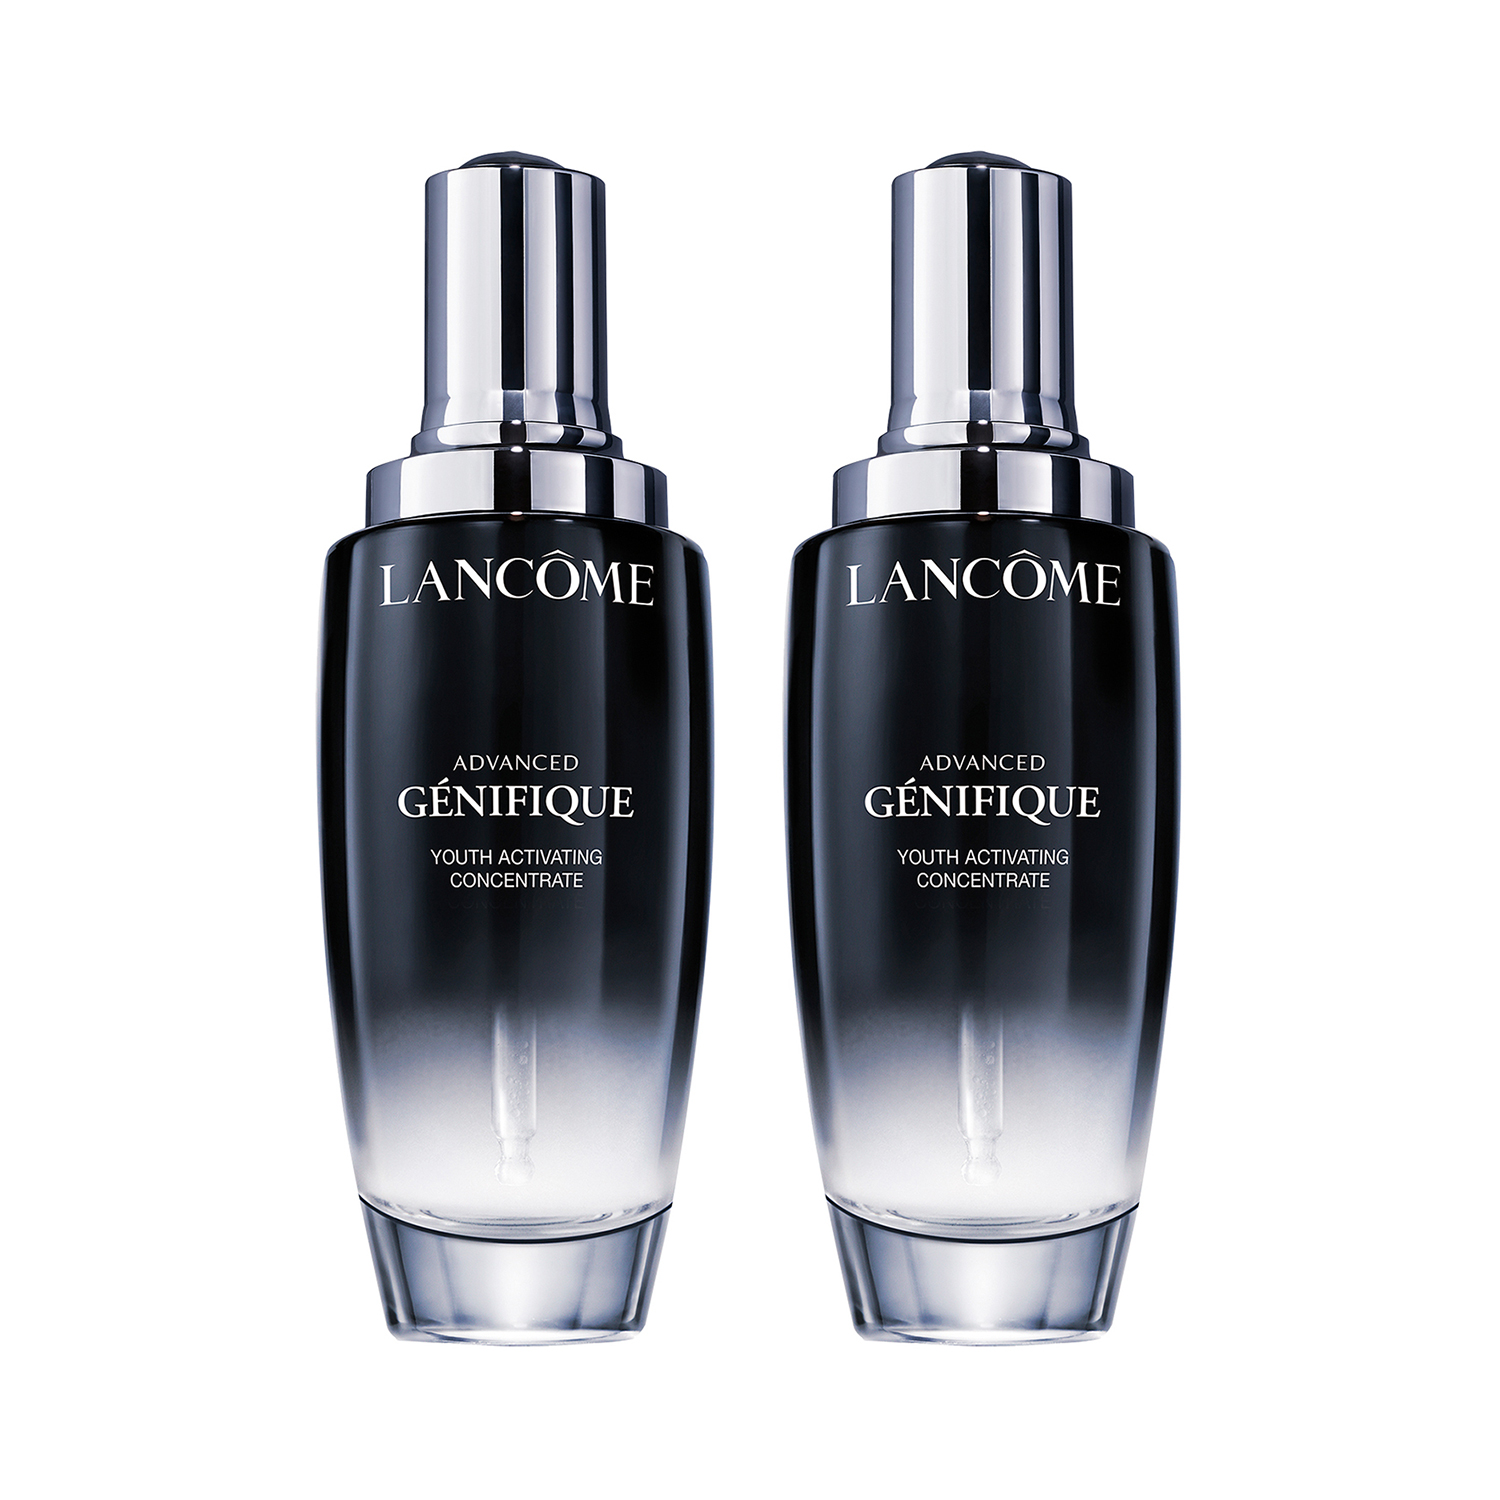 LANCOME ADVANCED GENIFIQUE YOUTH ACTIVATING SERUM DUO  100ML*2